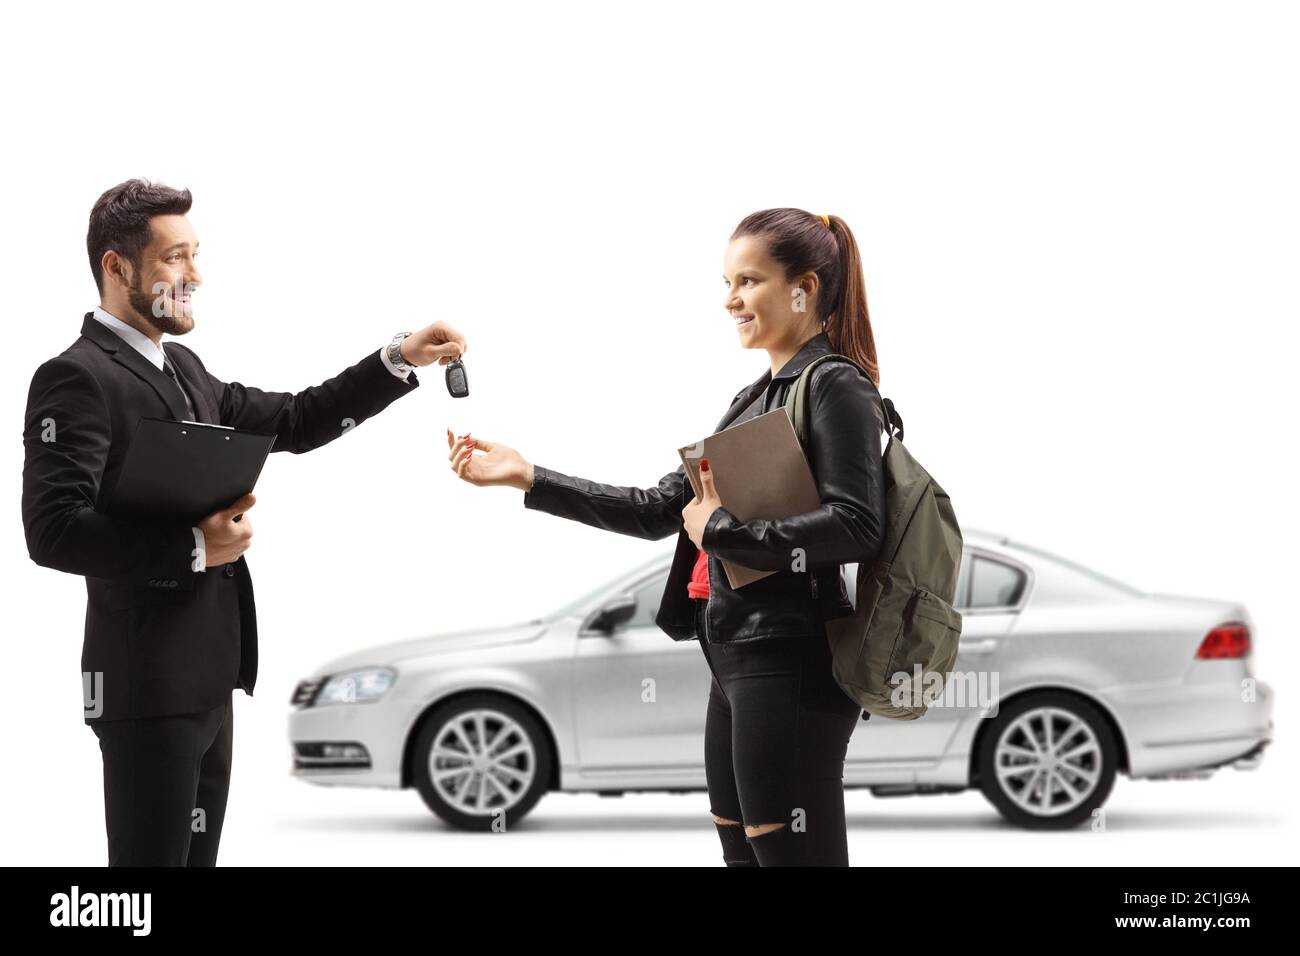 Car salesman giving car keys from a silver car to a young female student isolated on white background Stock Photo